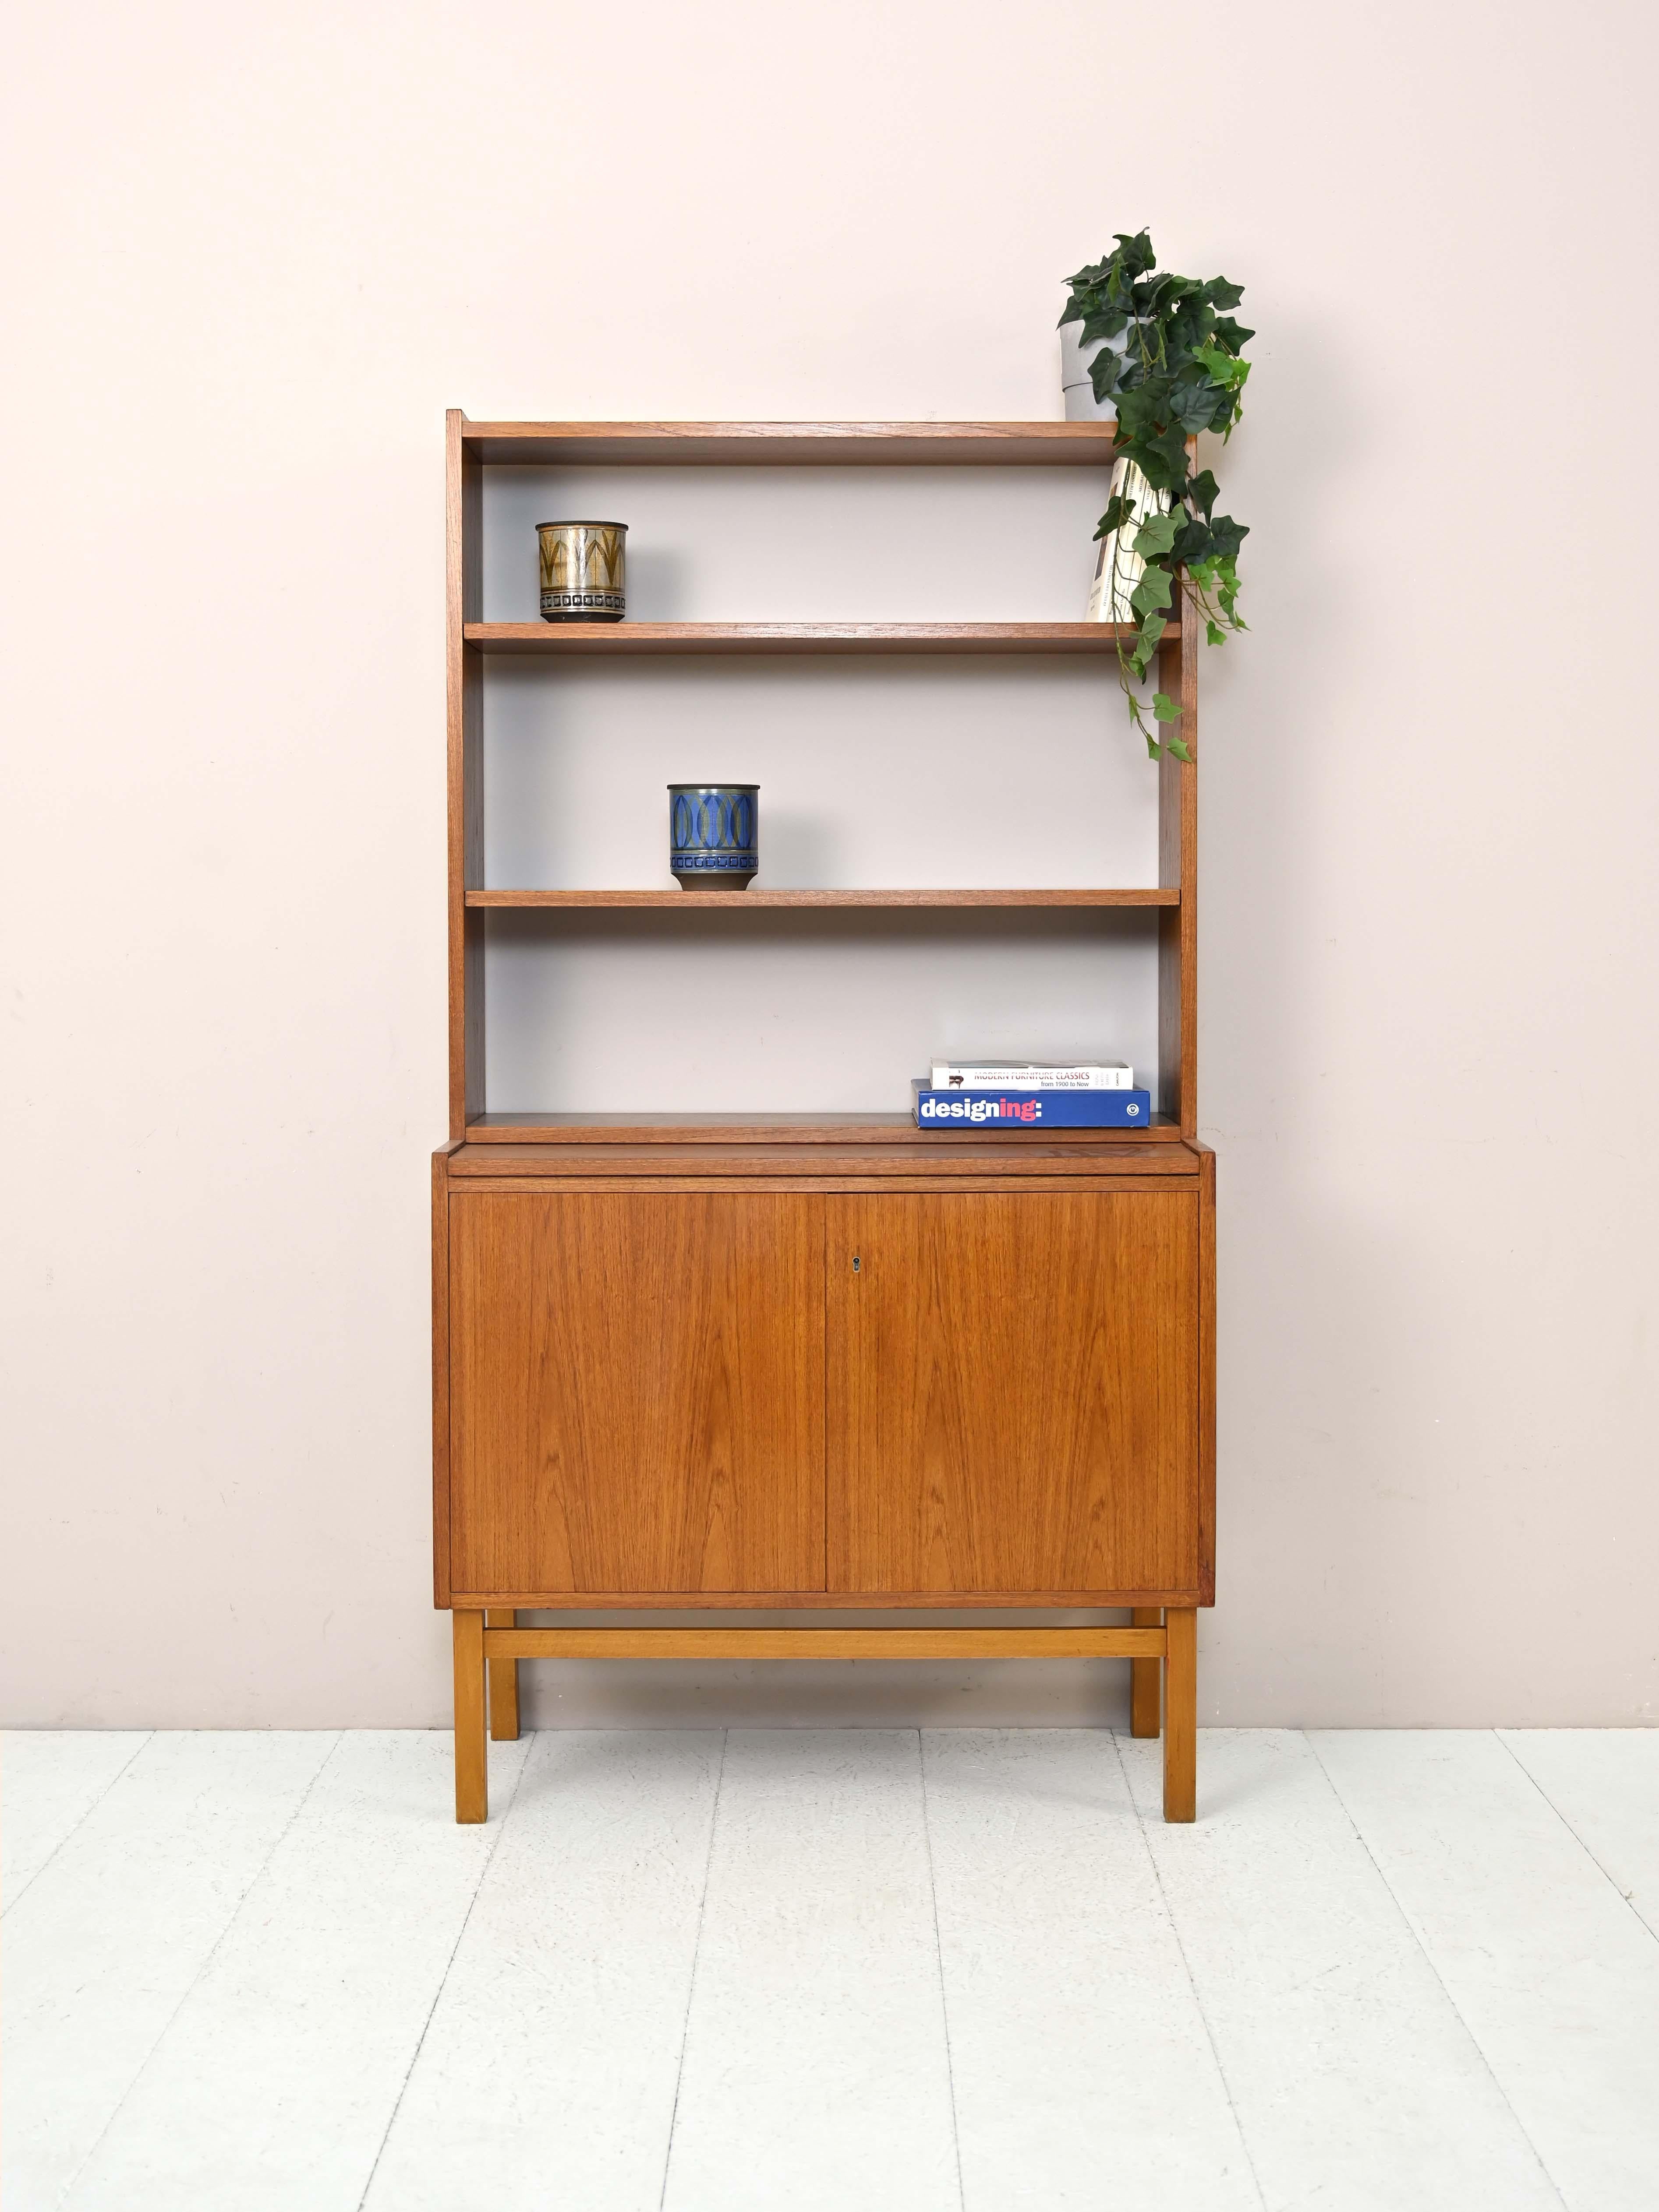 Swedish modern antique 1960s bookcase.

A simple and functional piece of furniture consisting of a storage compartment with hinged doors and an adjustable-height shelving system.
This bookcase, thanks to its small size, can be placed in different